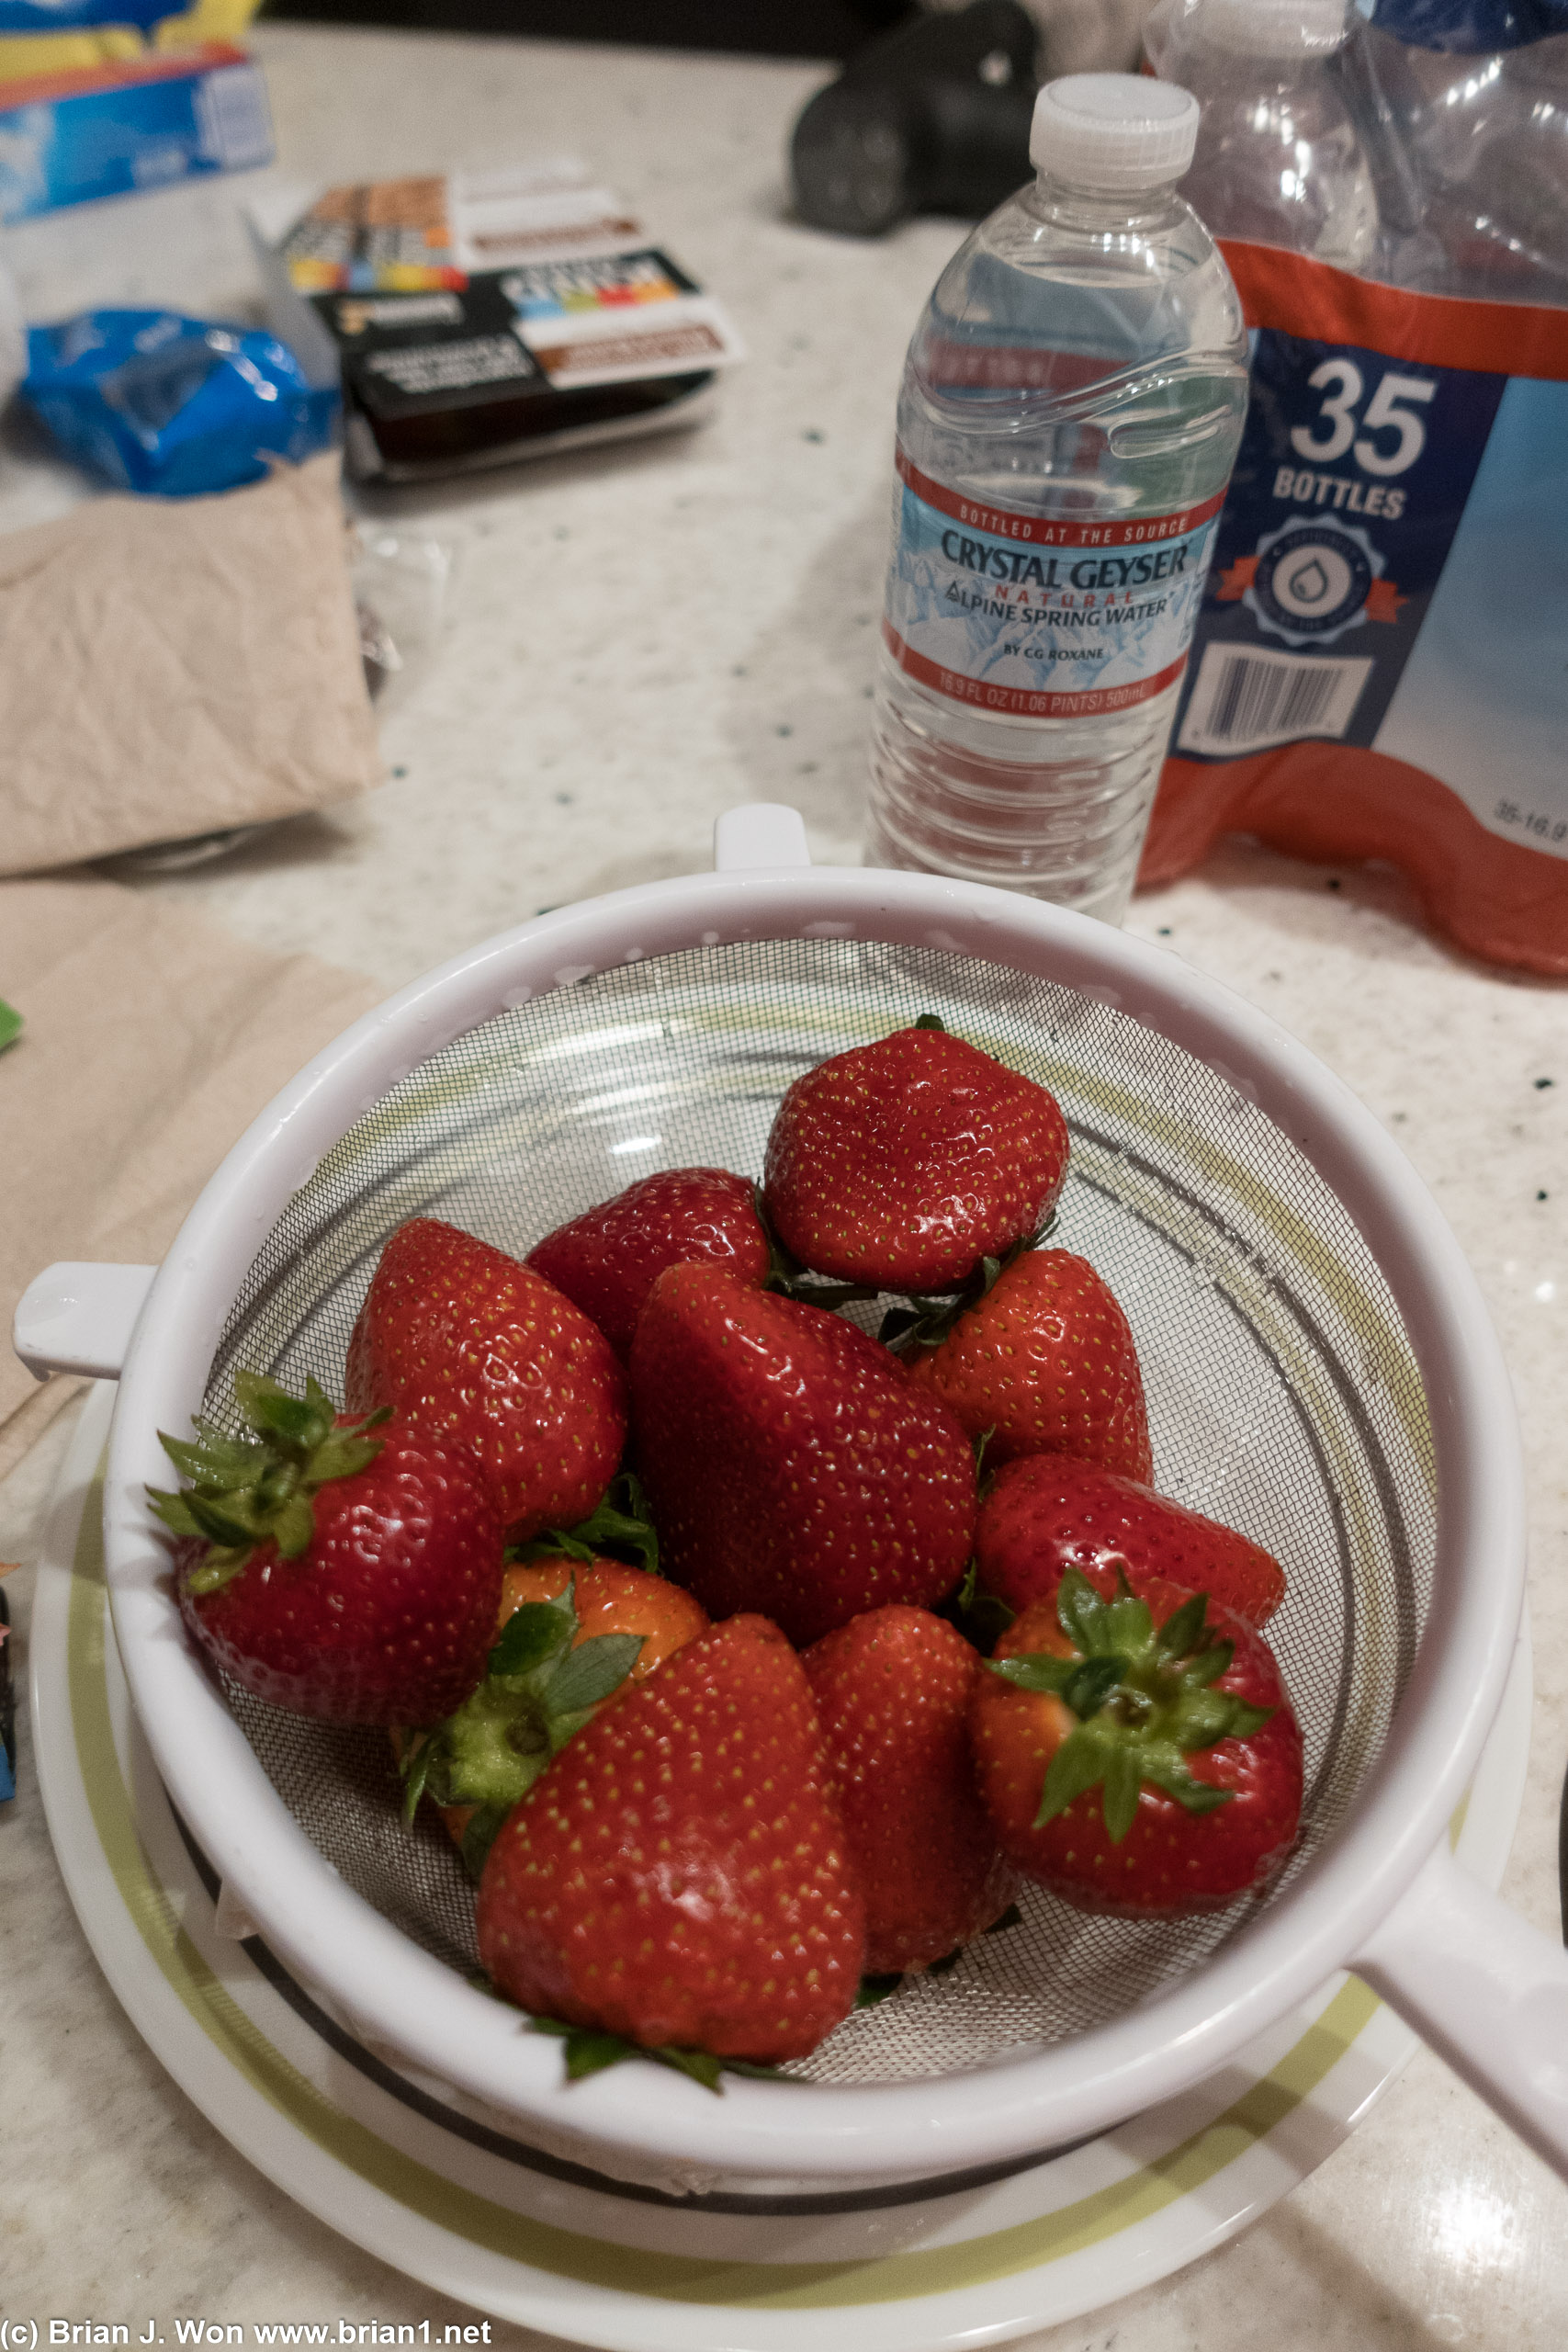 Rather large strawberries from the grocery store.